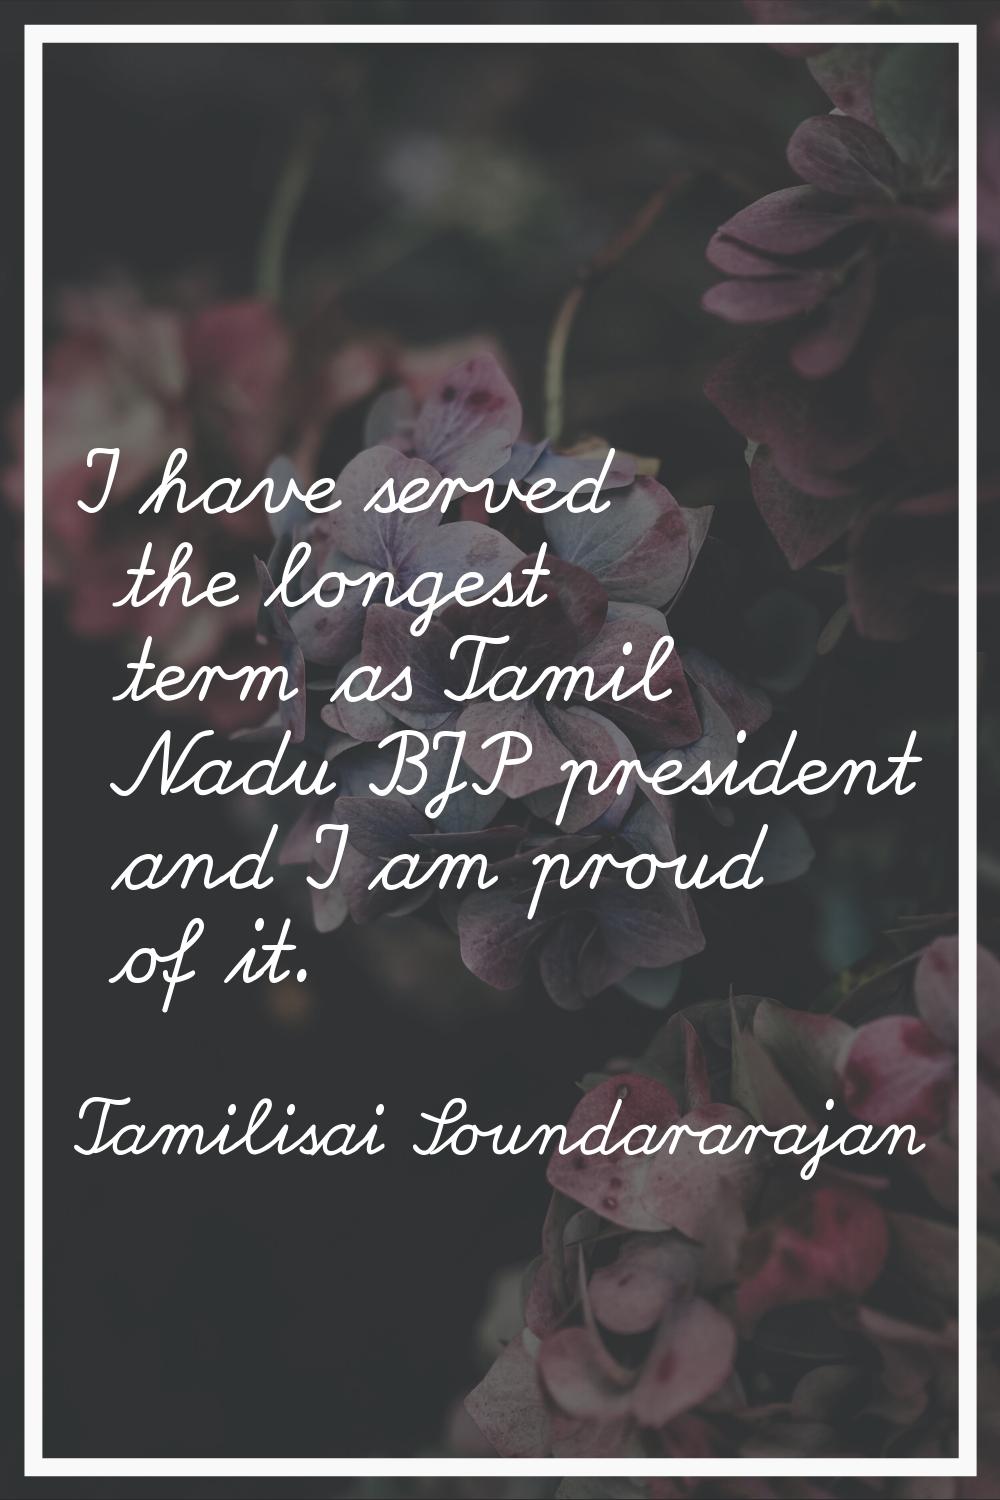 I have served the longest term as Tamil Nadu BJP president and I am proud of it.